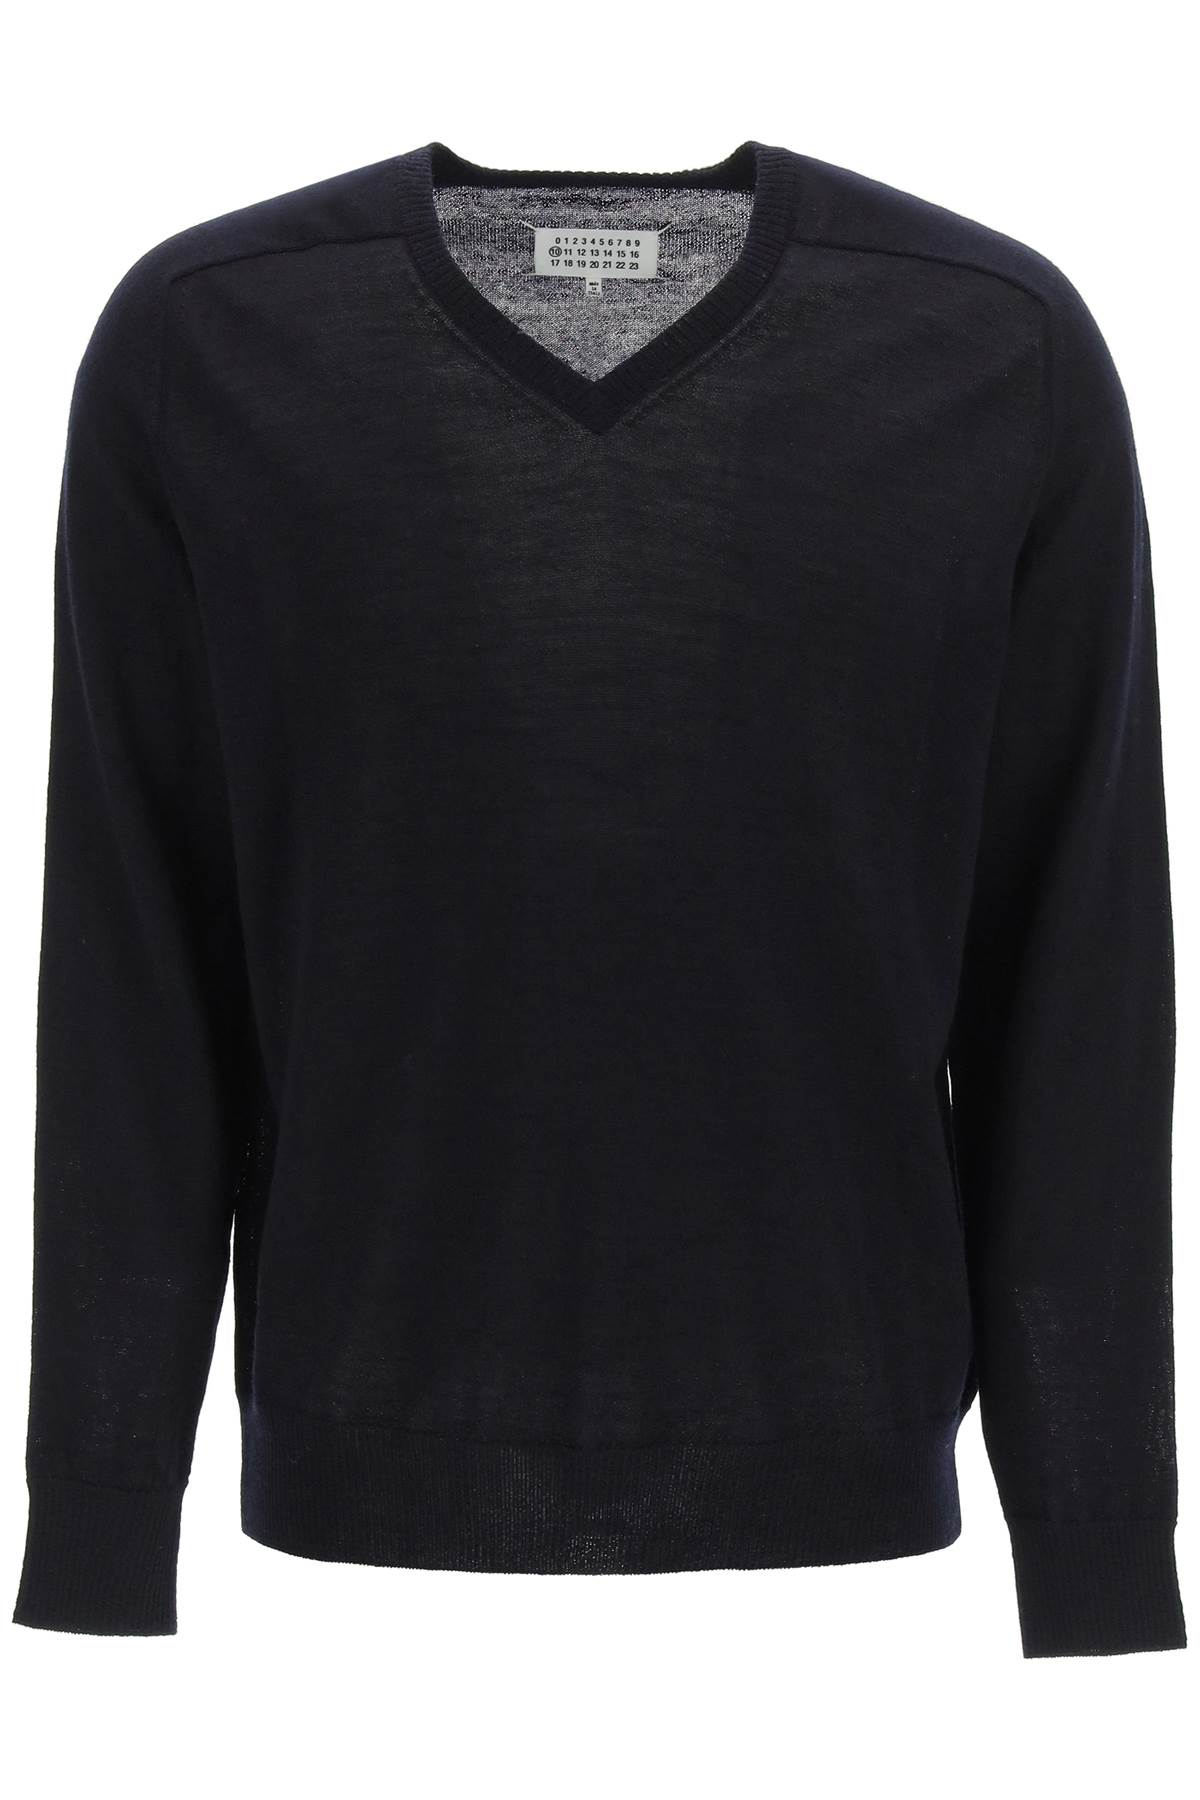 Maison Margiela Sweater With Elbow Patches